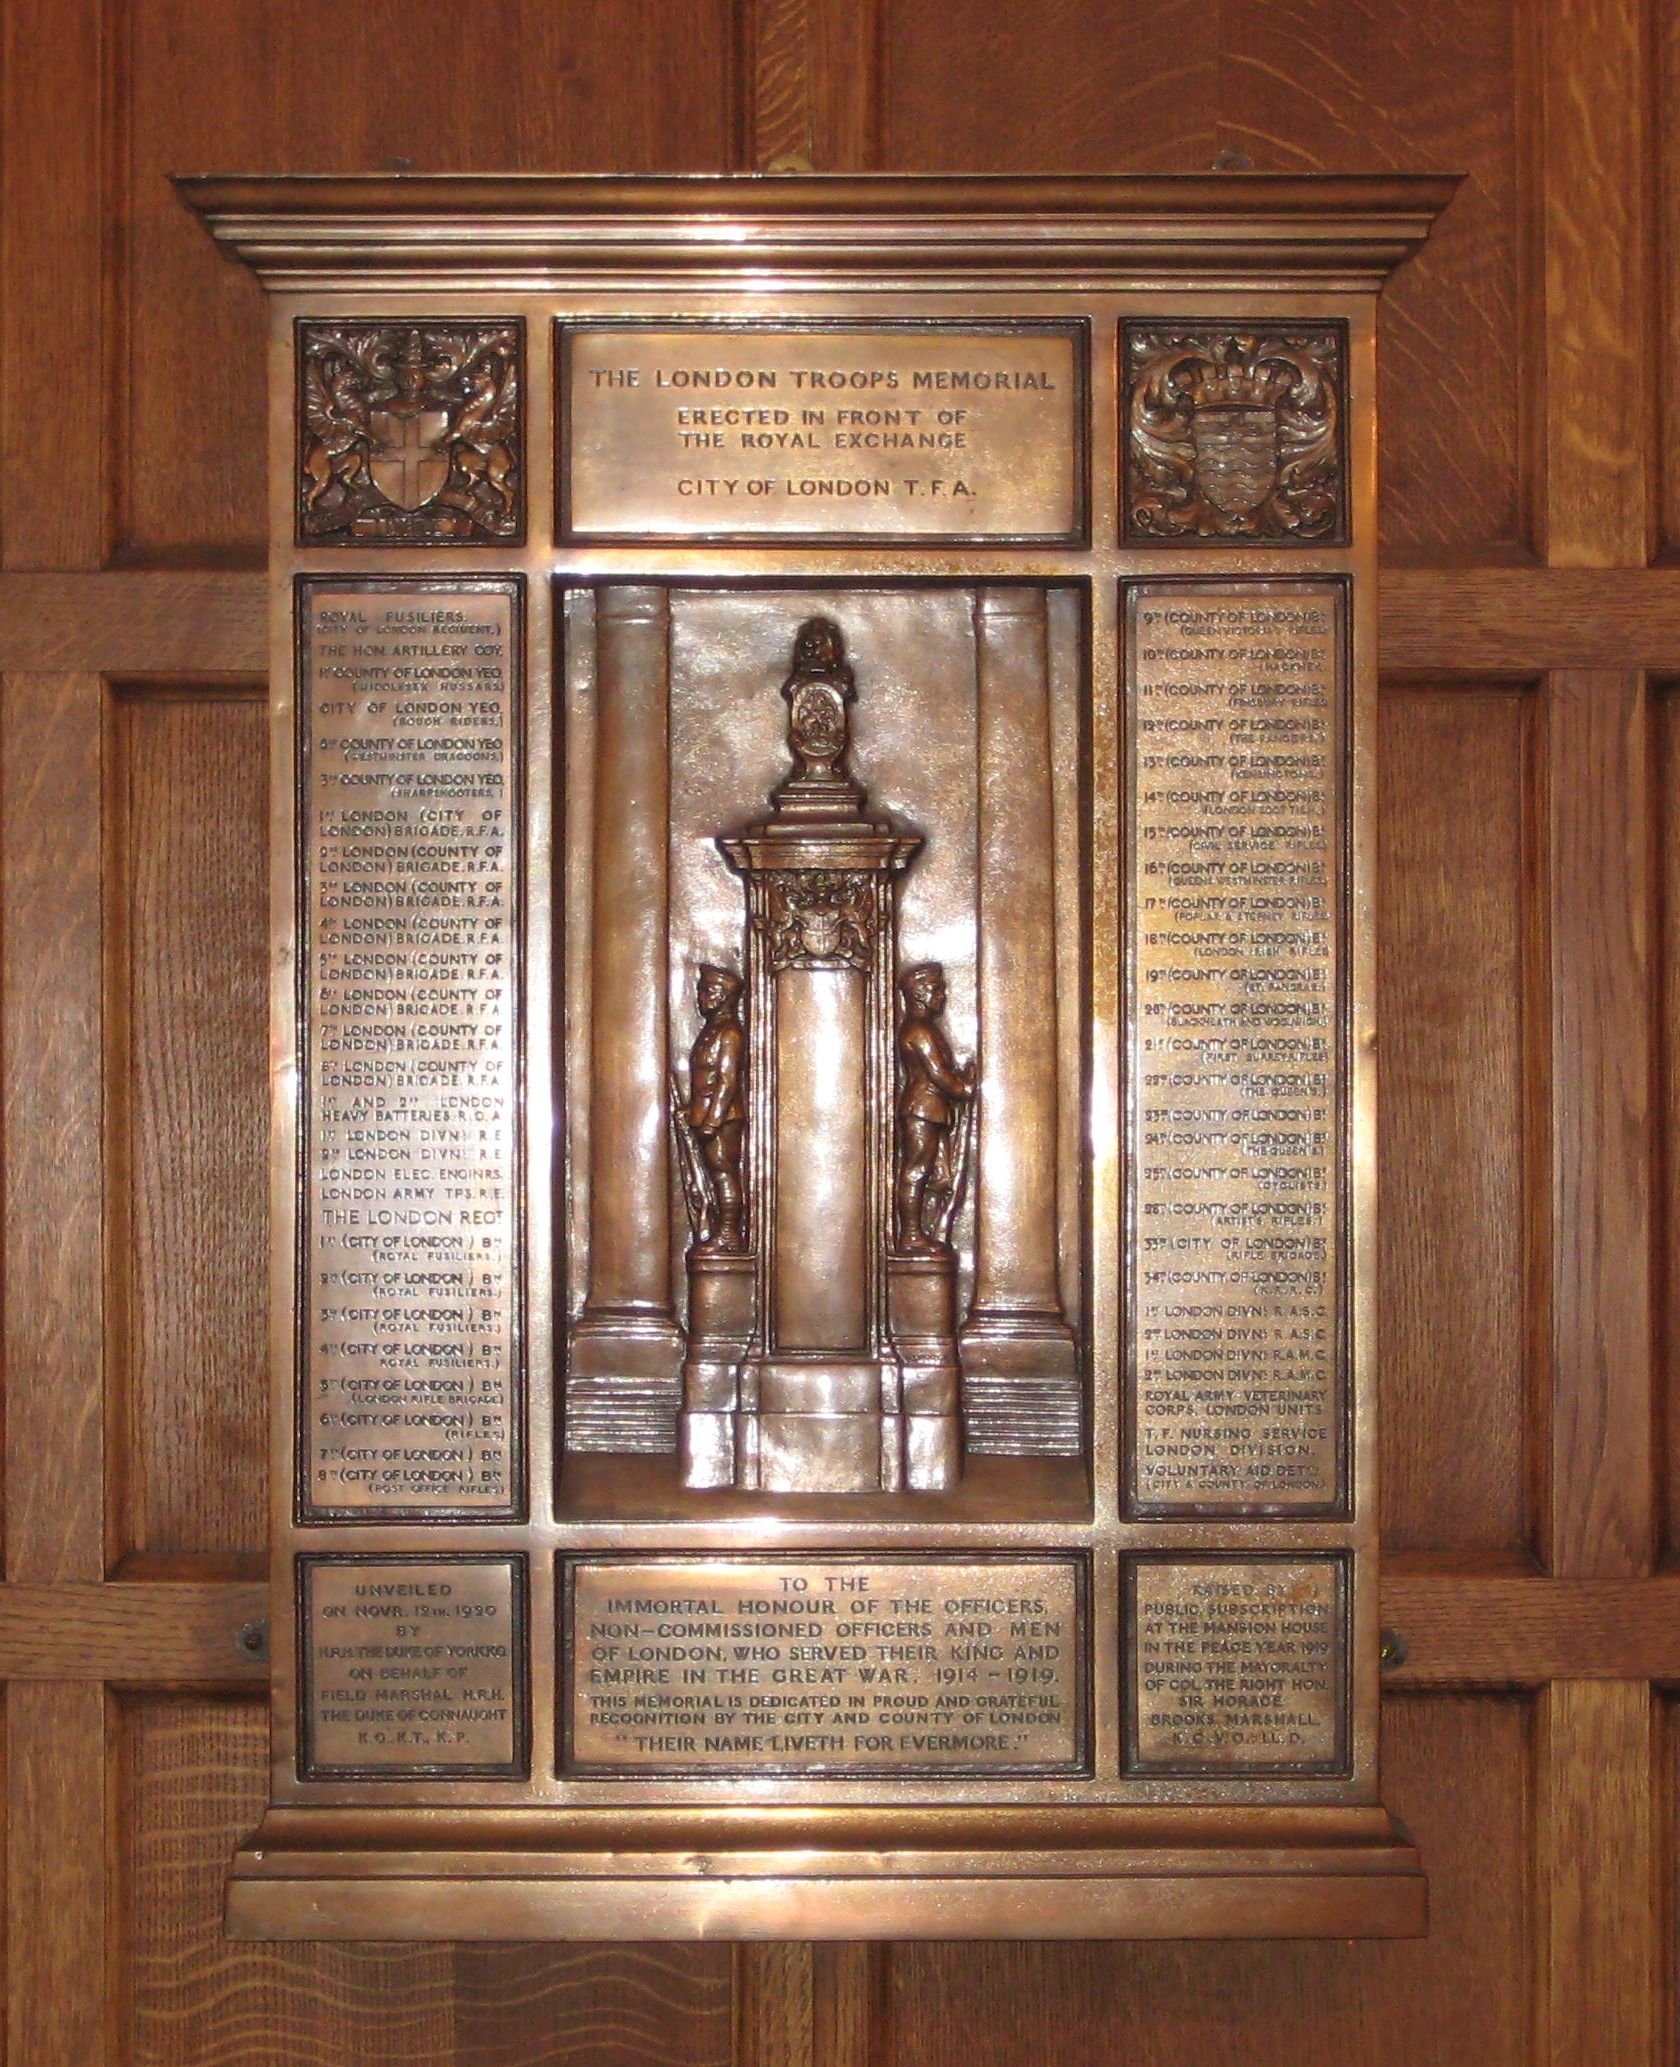 A bronze plaque that was presented to all units listed on the London Troops Memorial